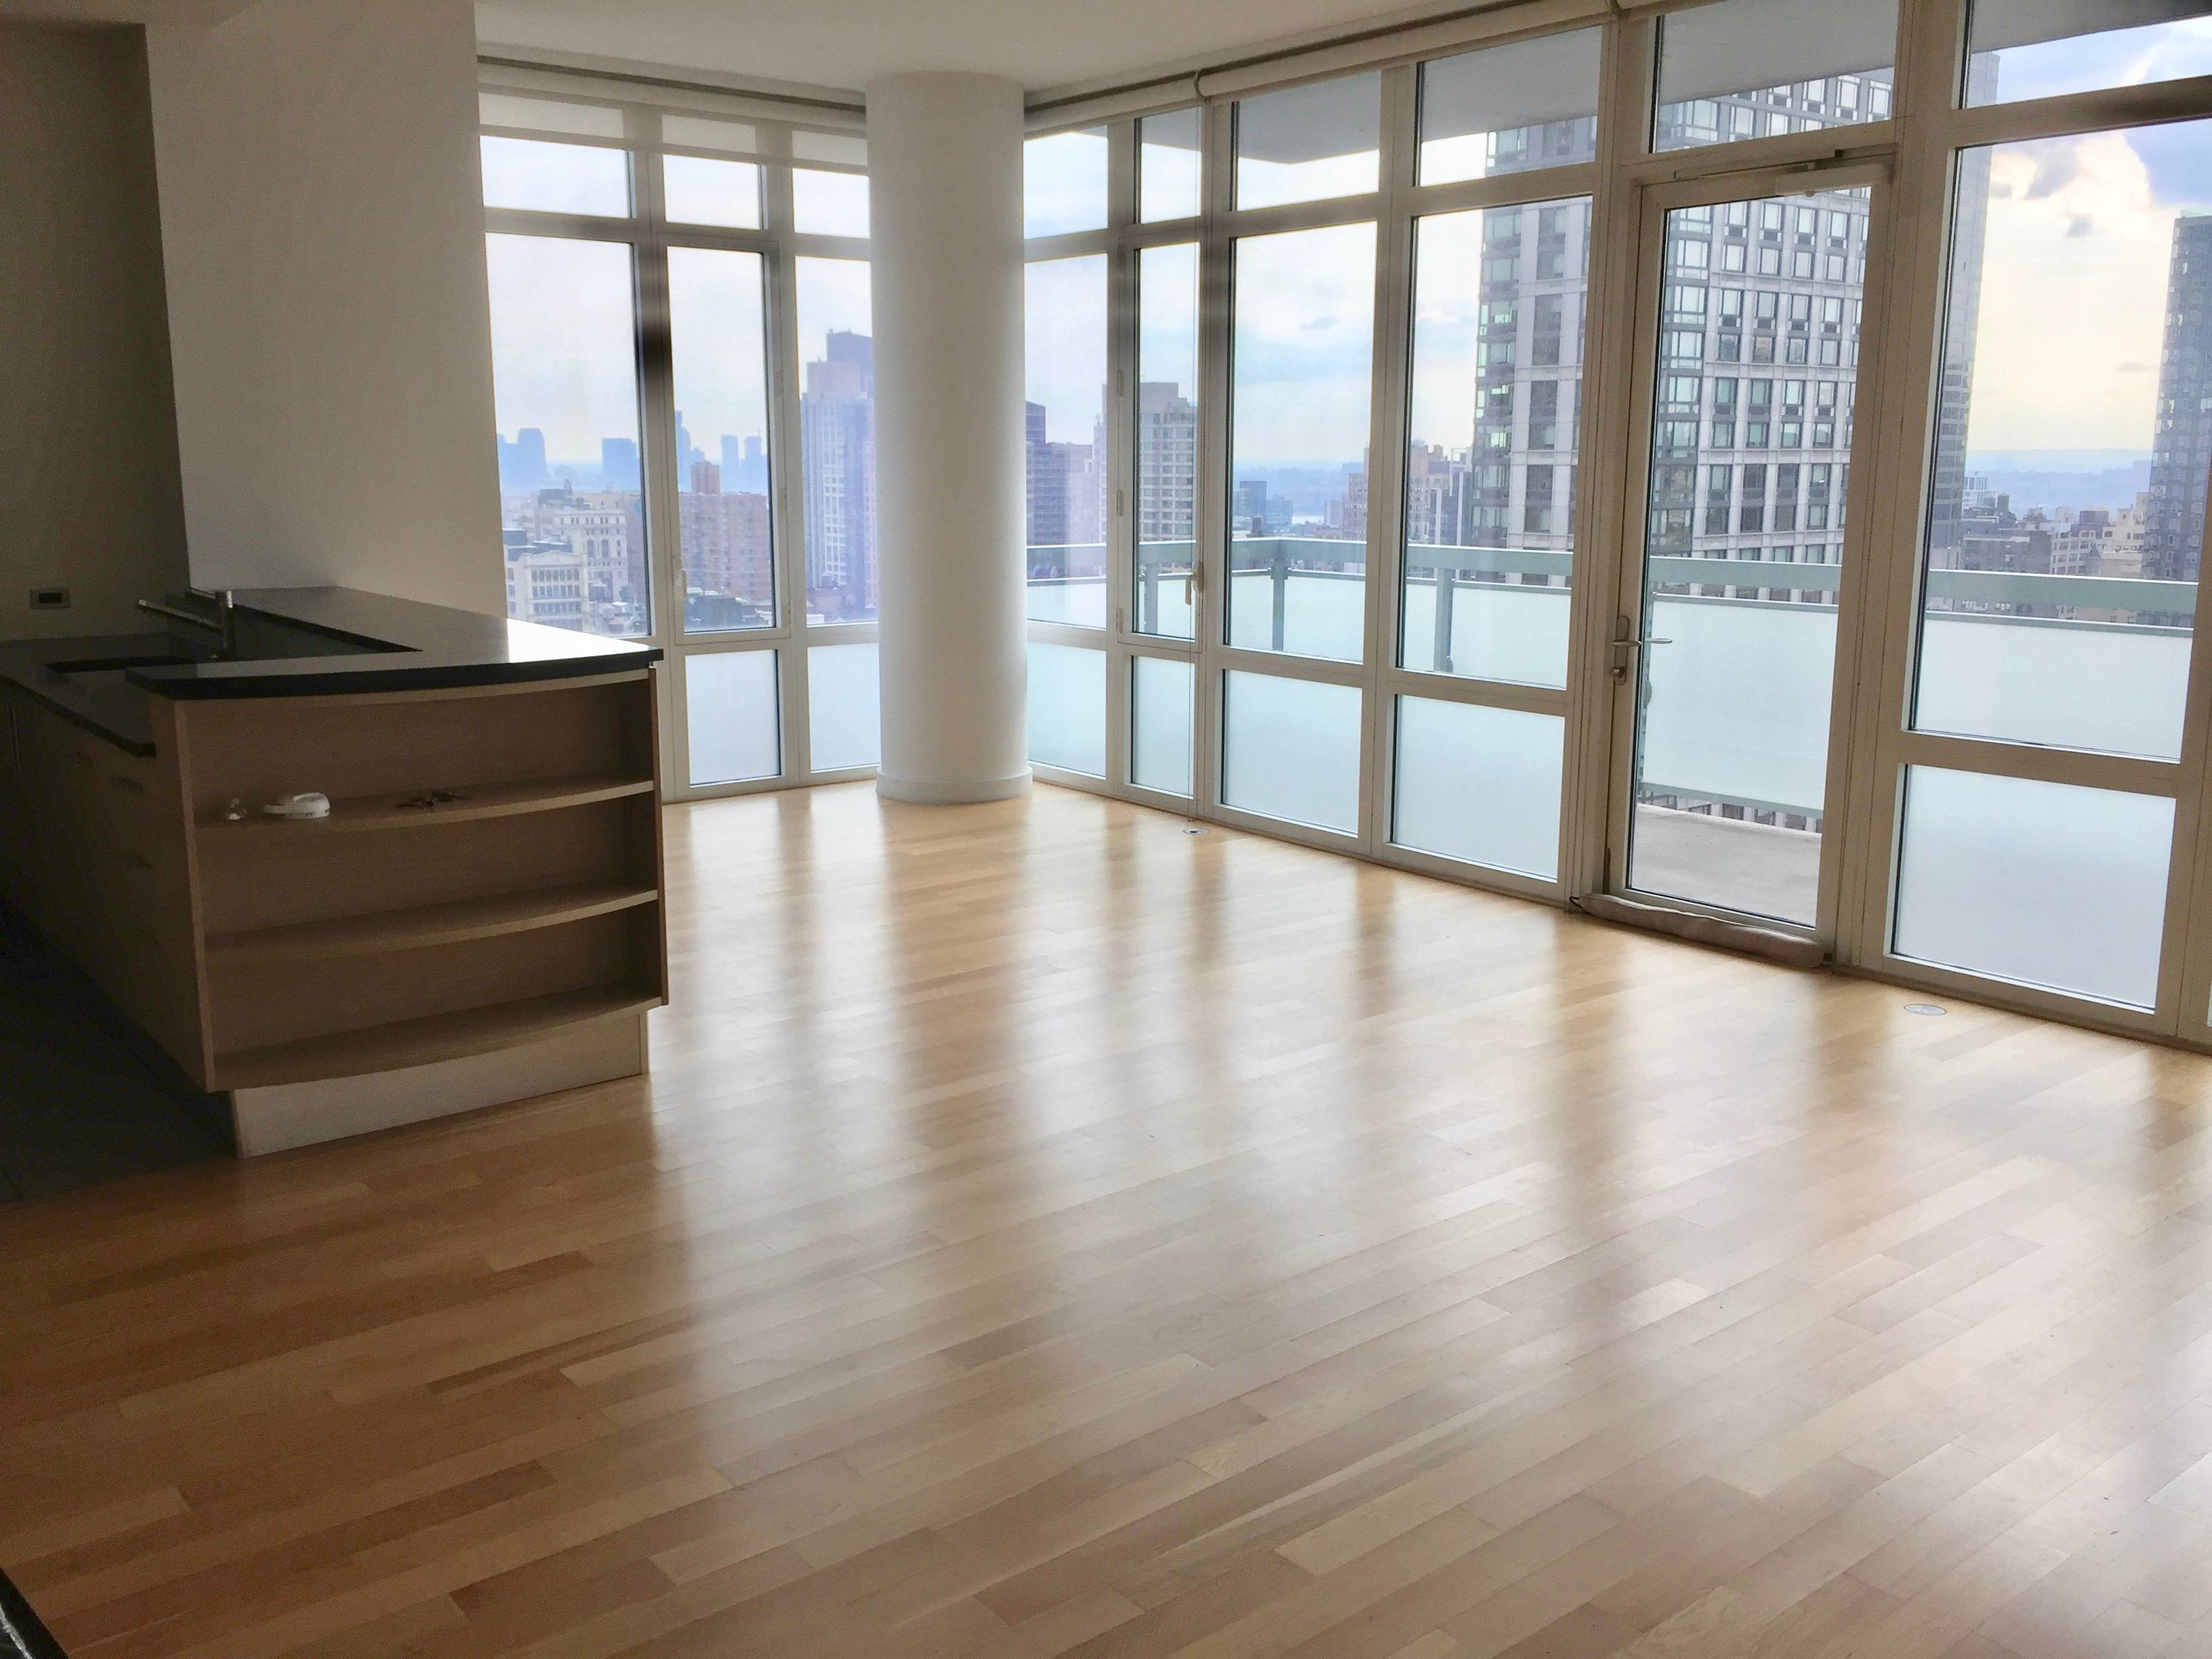 PRICE IMPROVEMENT - BEAUTIFUL & LUXURIOUS 325 FIFTH AVENUE - 2 BEDROOM, 2 BATH  with Balcony #34F - CORNER APARTMENT - OPEN SOUTH WEST VIEWS